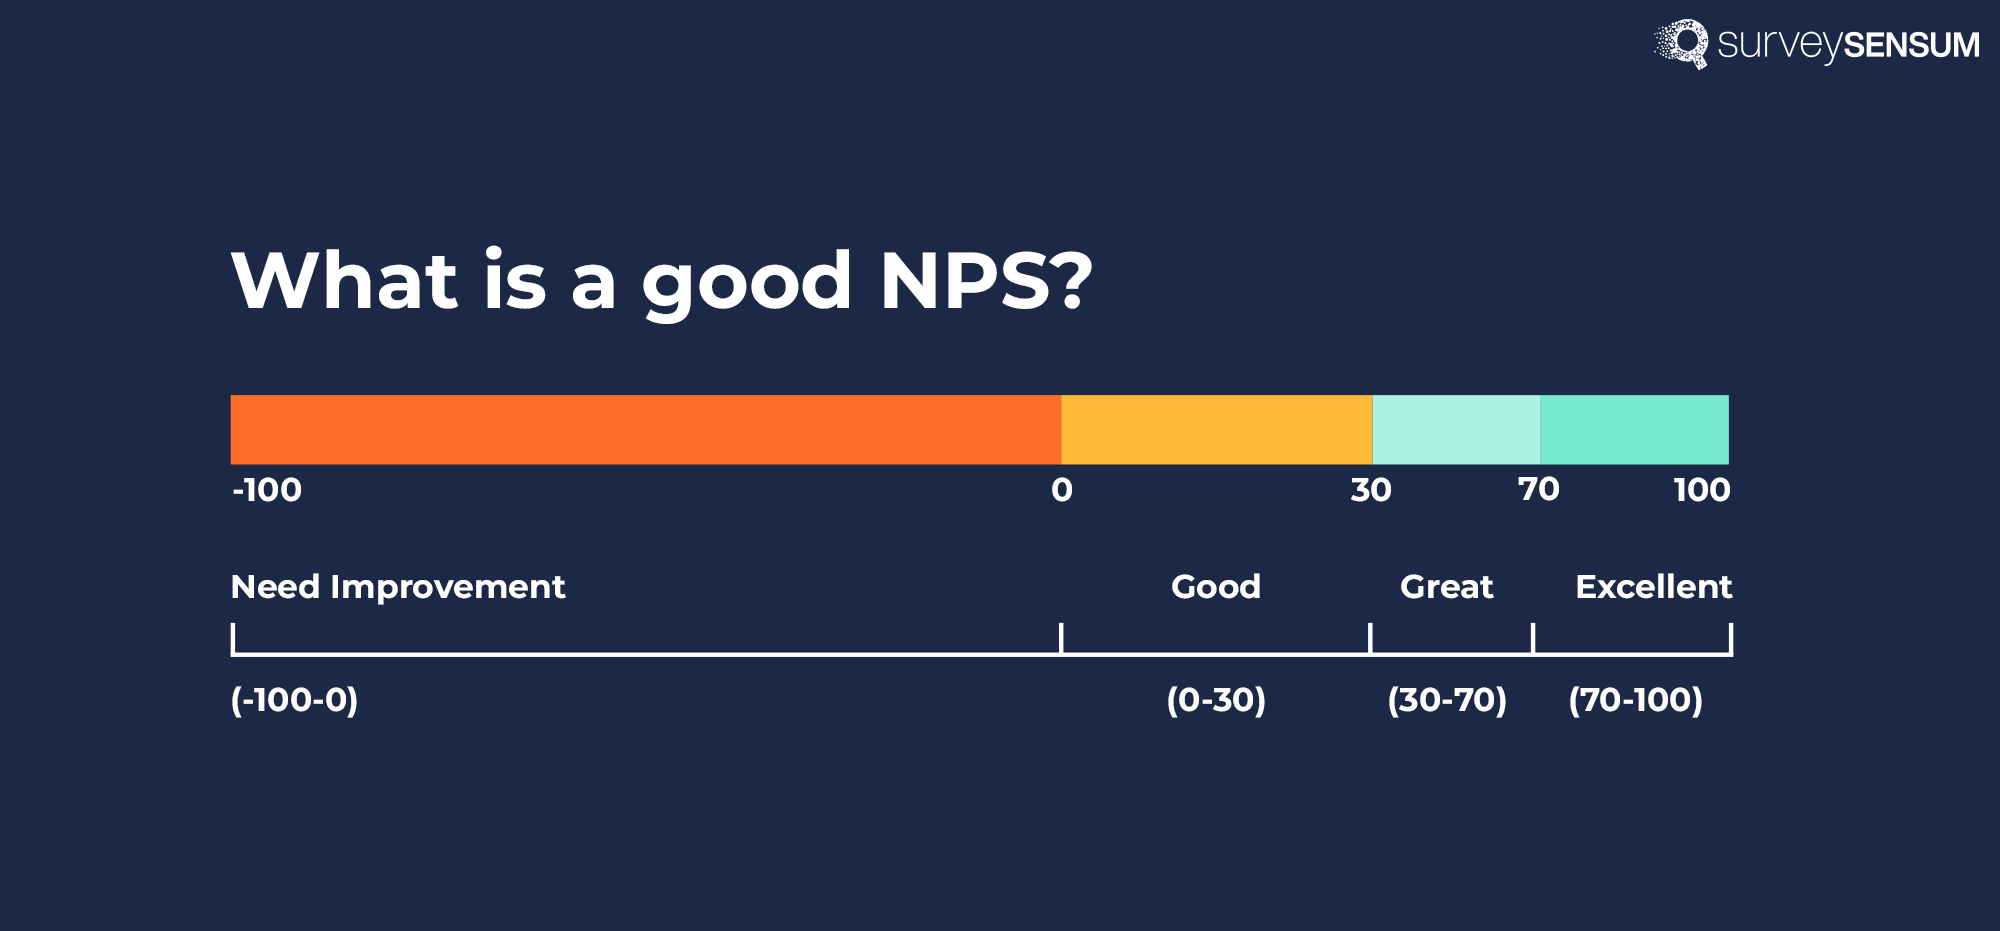 The image shows the categorization of NPS score where a score of 0-30 is good, 30-70 is great, 70-100 is excellent, and anything in the negative is bad. 